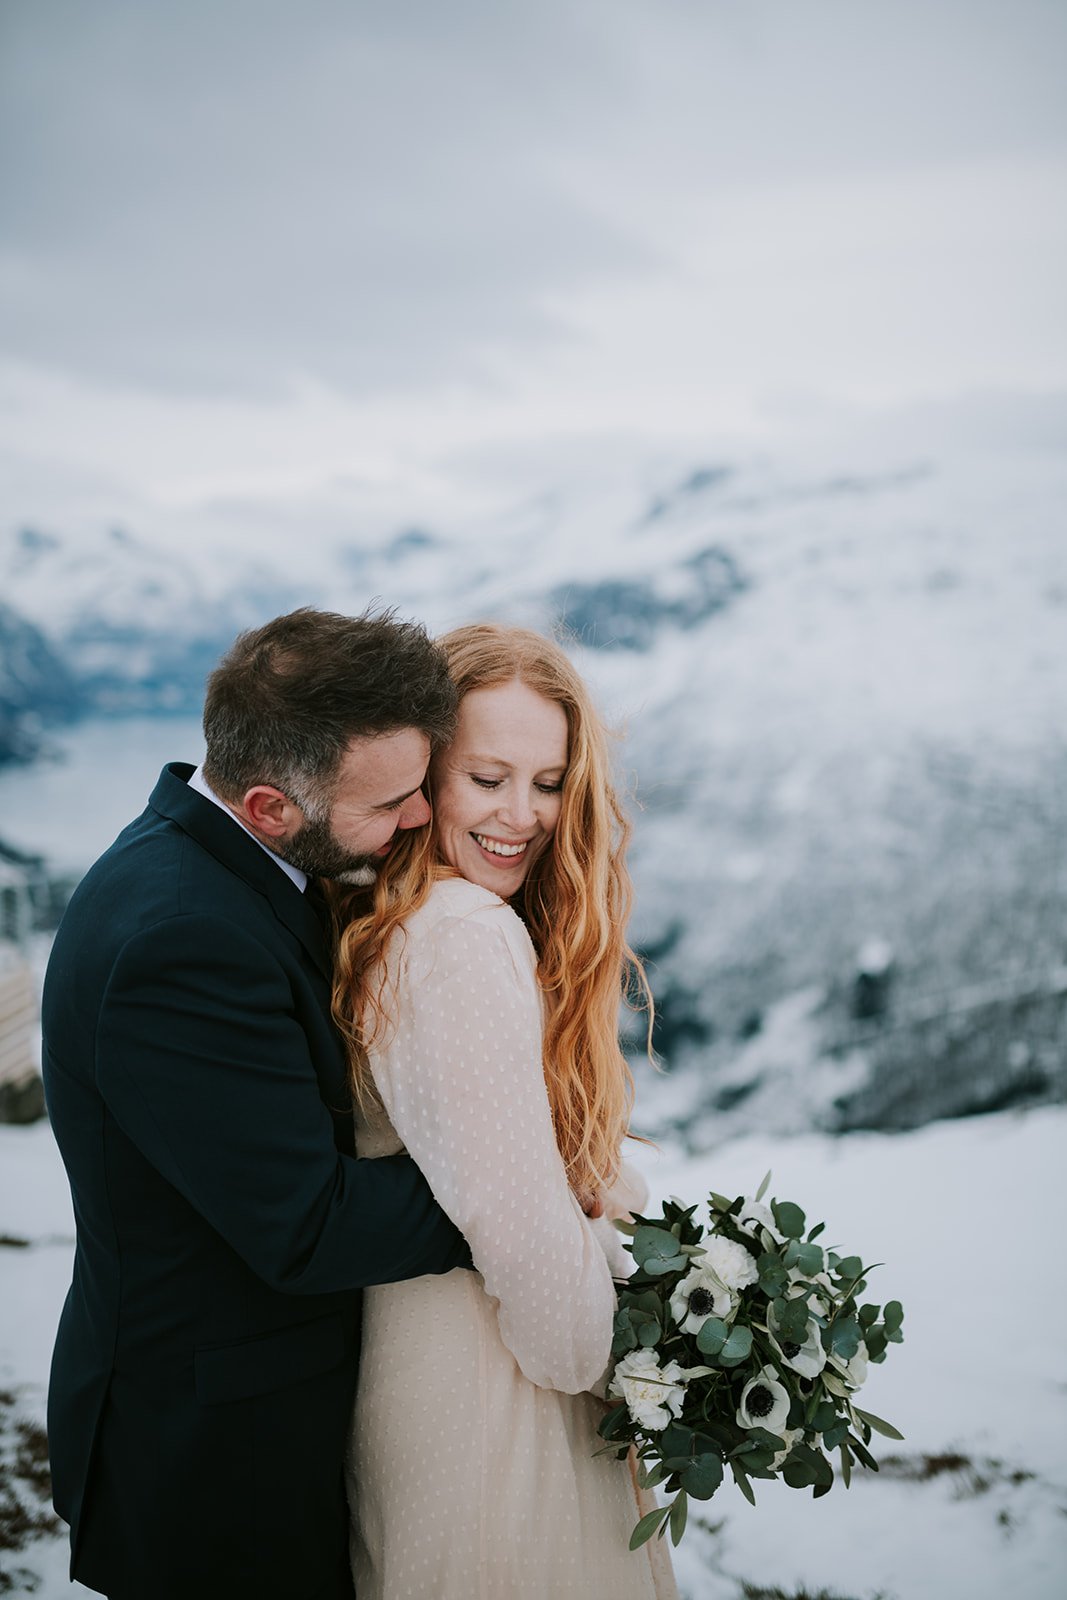 Groom hugs the bride from behind as she smiles while holding her bouquet at a snowy elopement destination